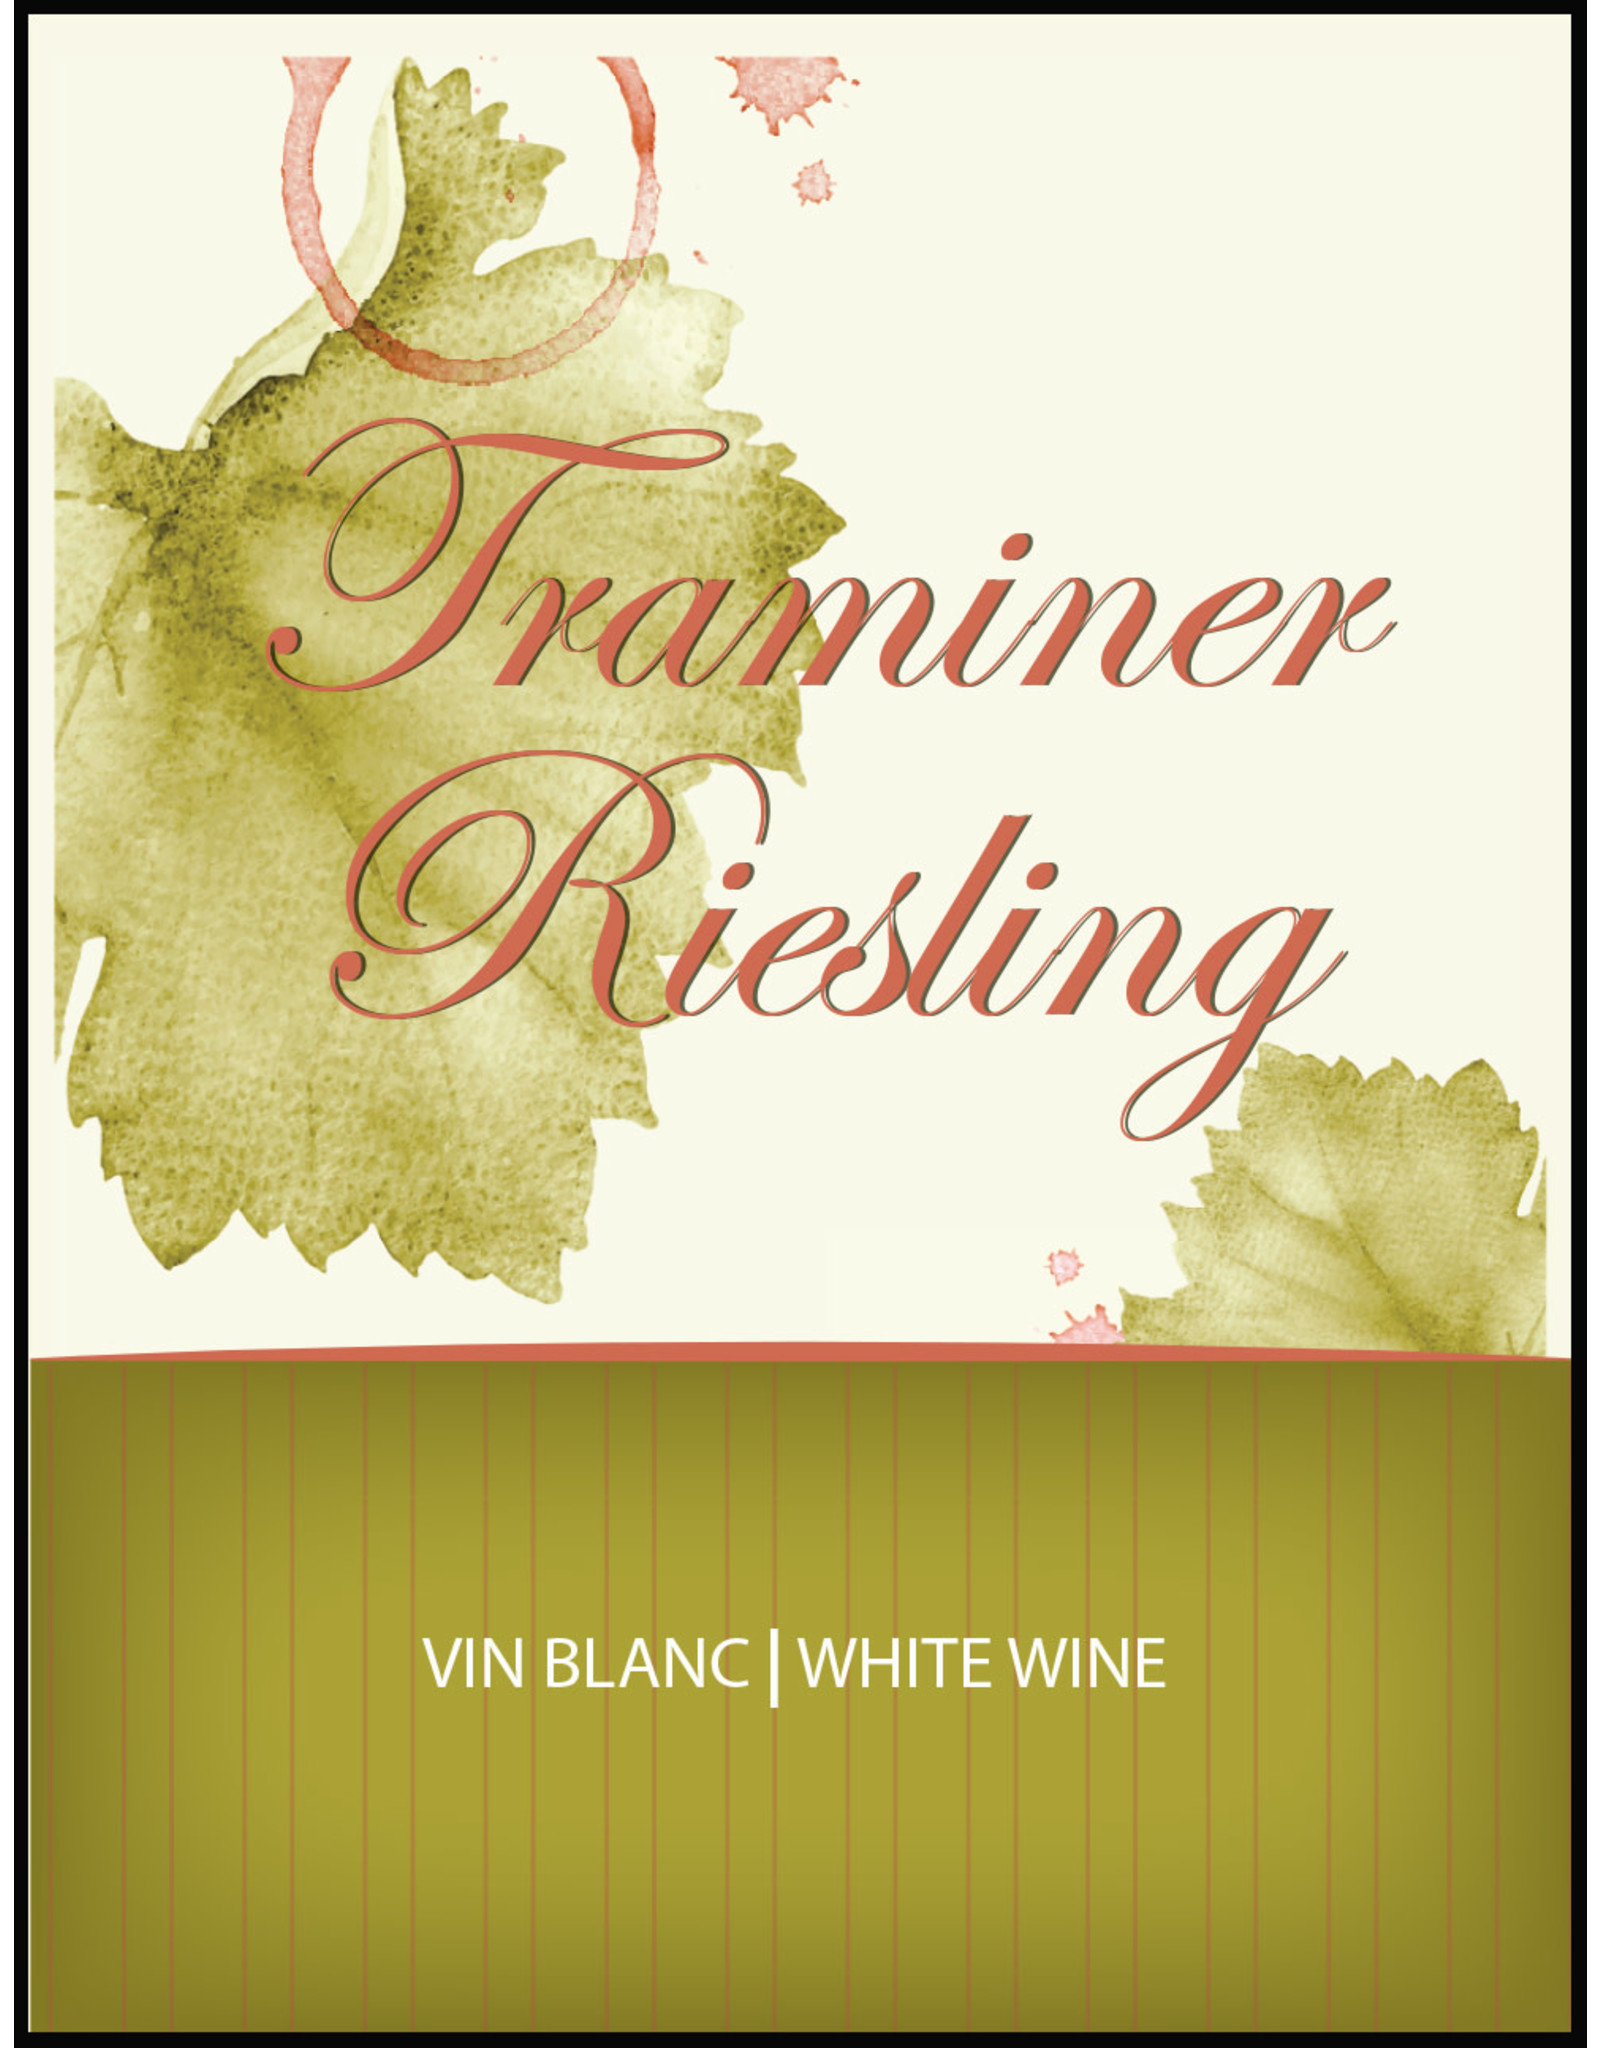 LD Carlson Traminer Riesling 30 ct Wine Labels